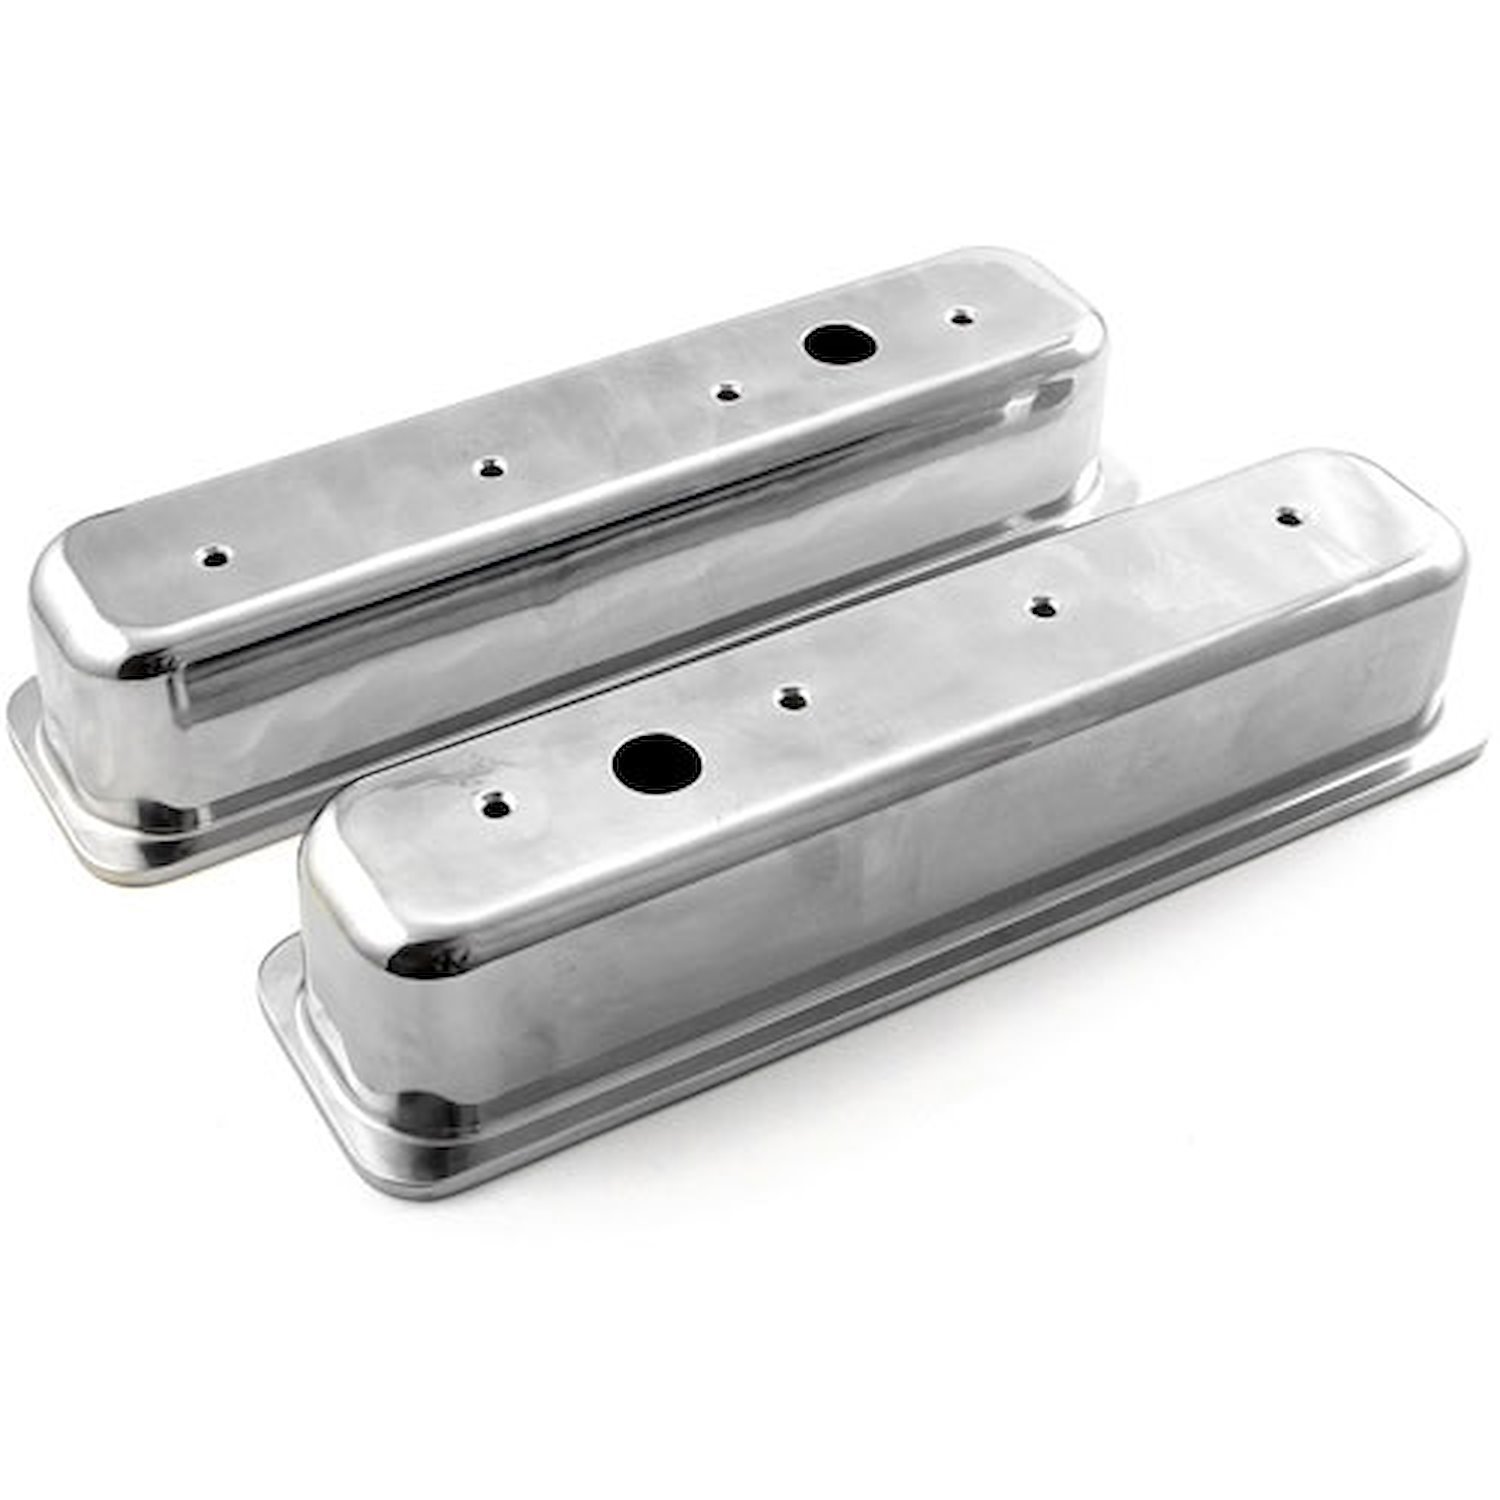 Cast Aluminum Valve Covers Small Block Chevy 350 - Polished Finish